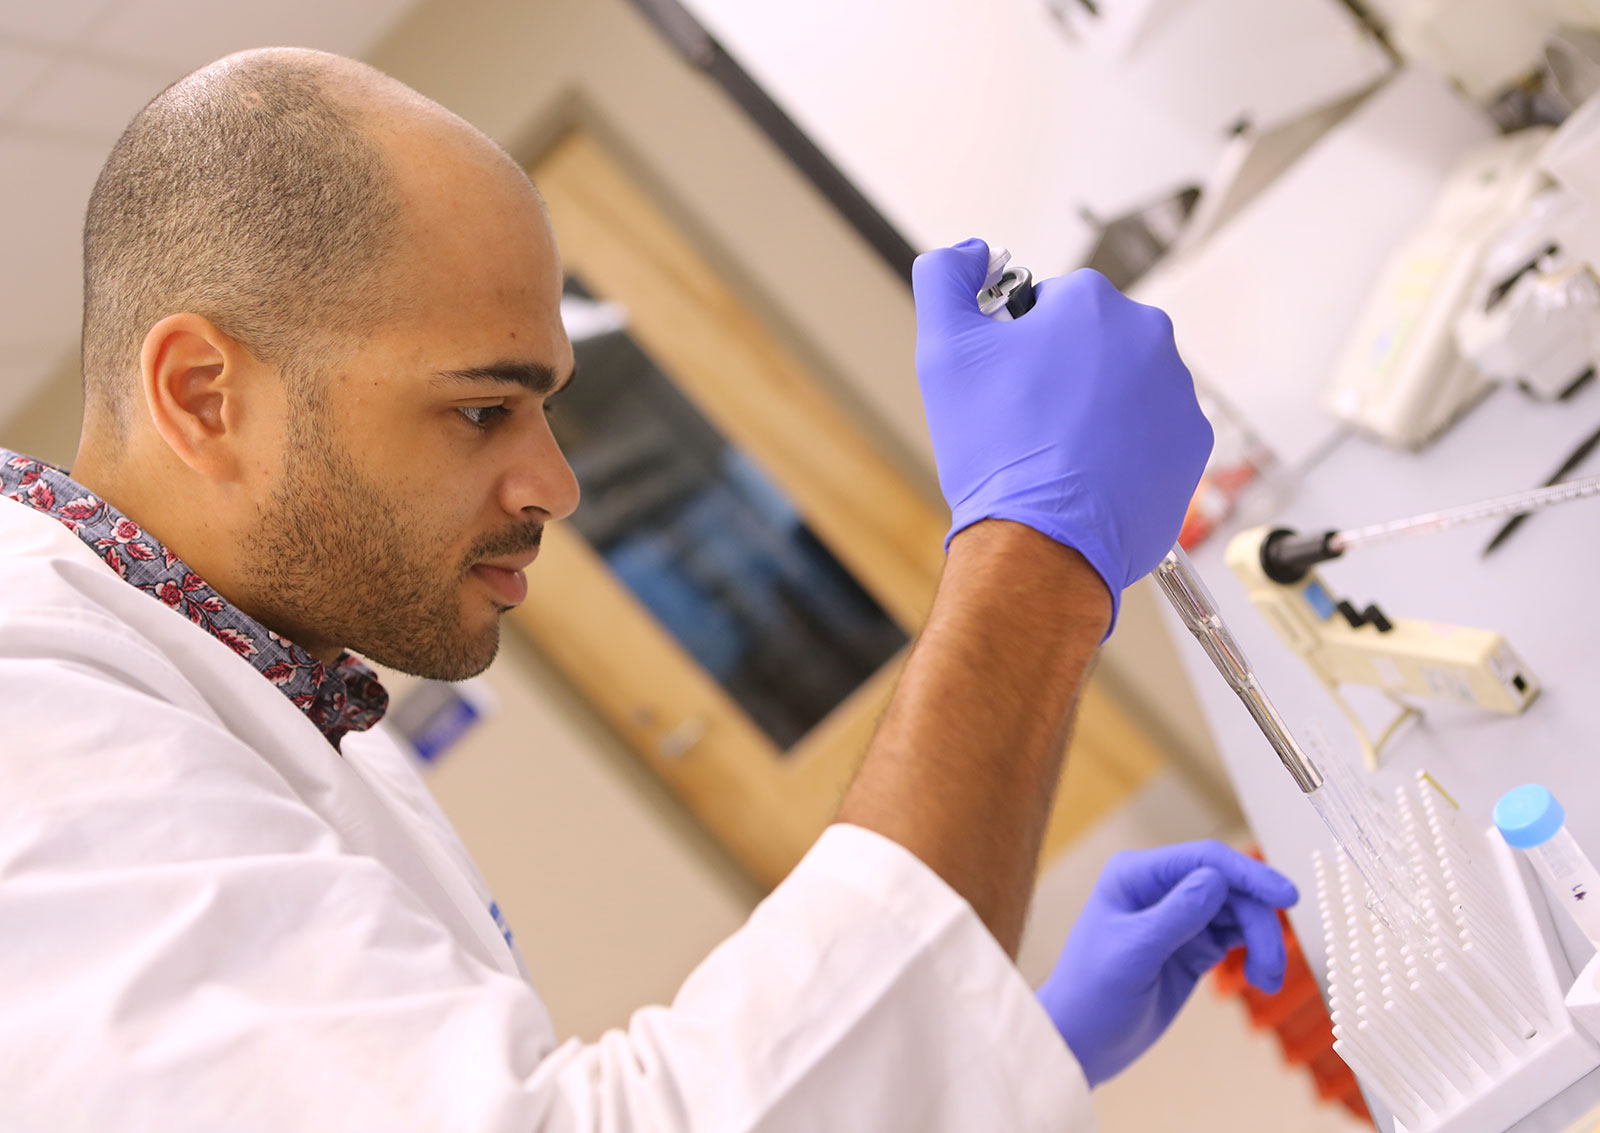 Robert Nwokonko performs research on calcium signaling in cells, which can help improve understanding of autoimmune diseases and diseases that compromise the immune system. Nwokonko is pictured wearing a laboratory coat and gloves, working at a laboratory bench with a pipette in his right hand.